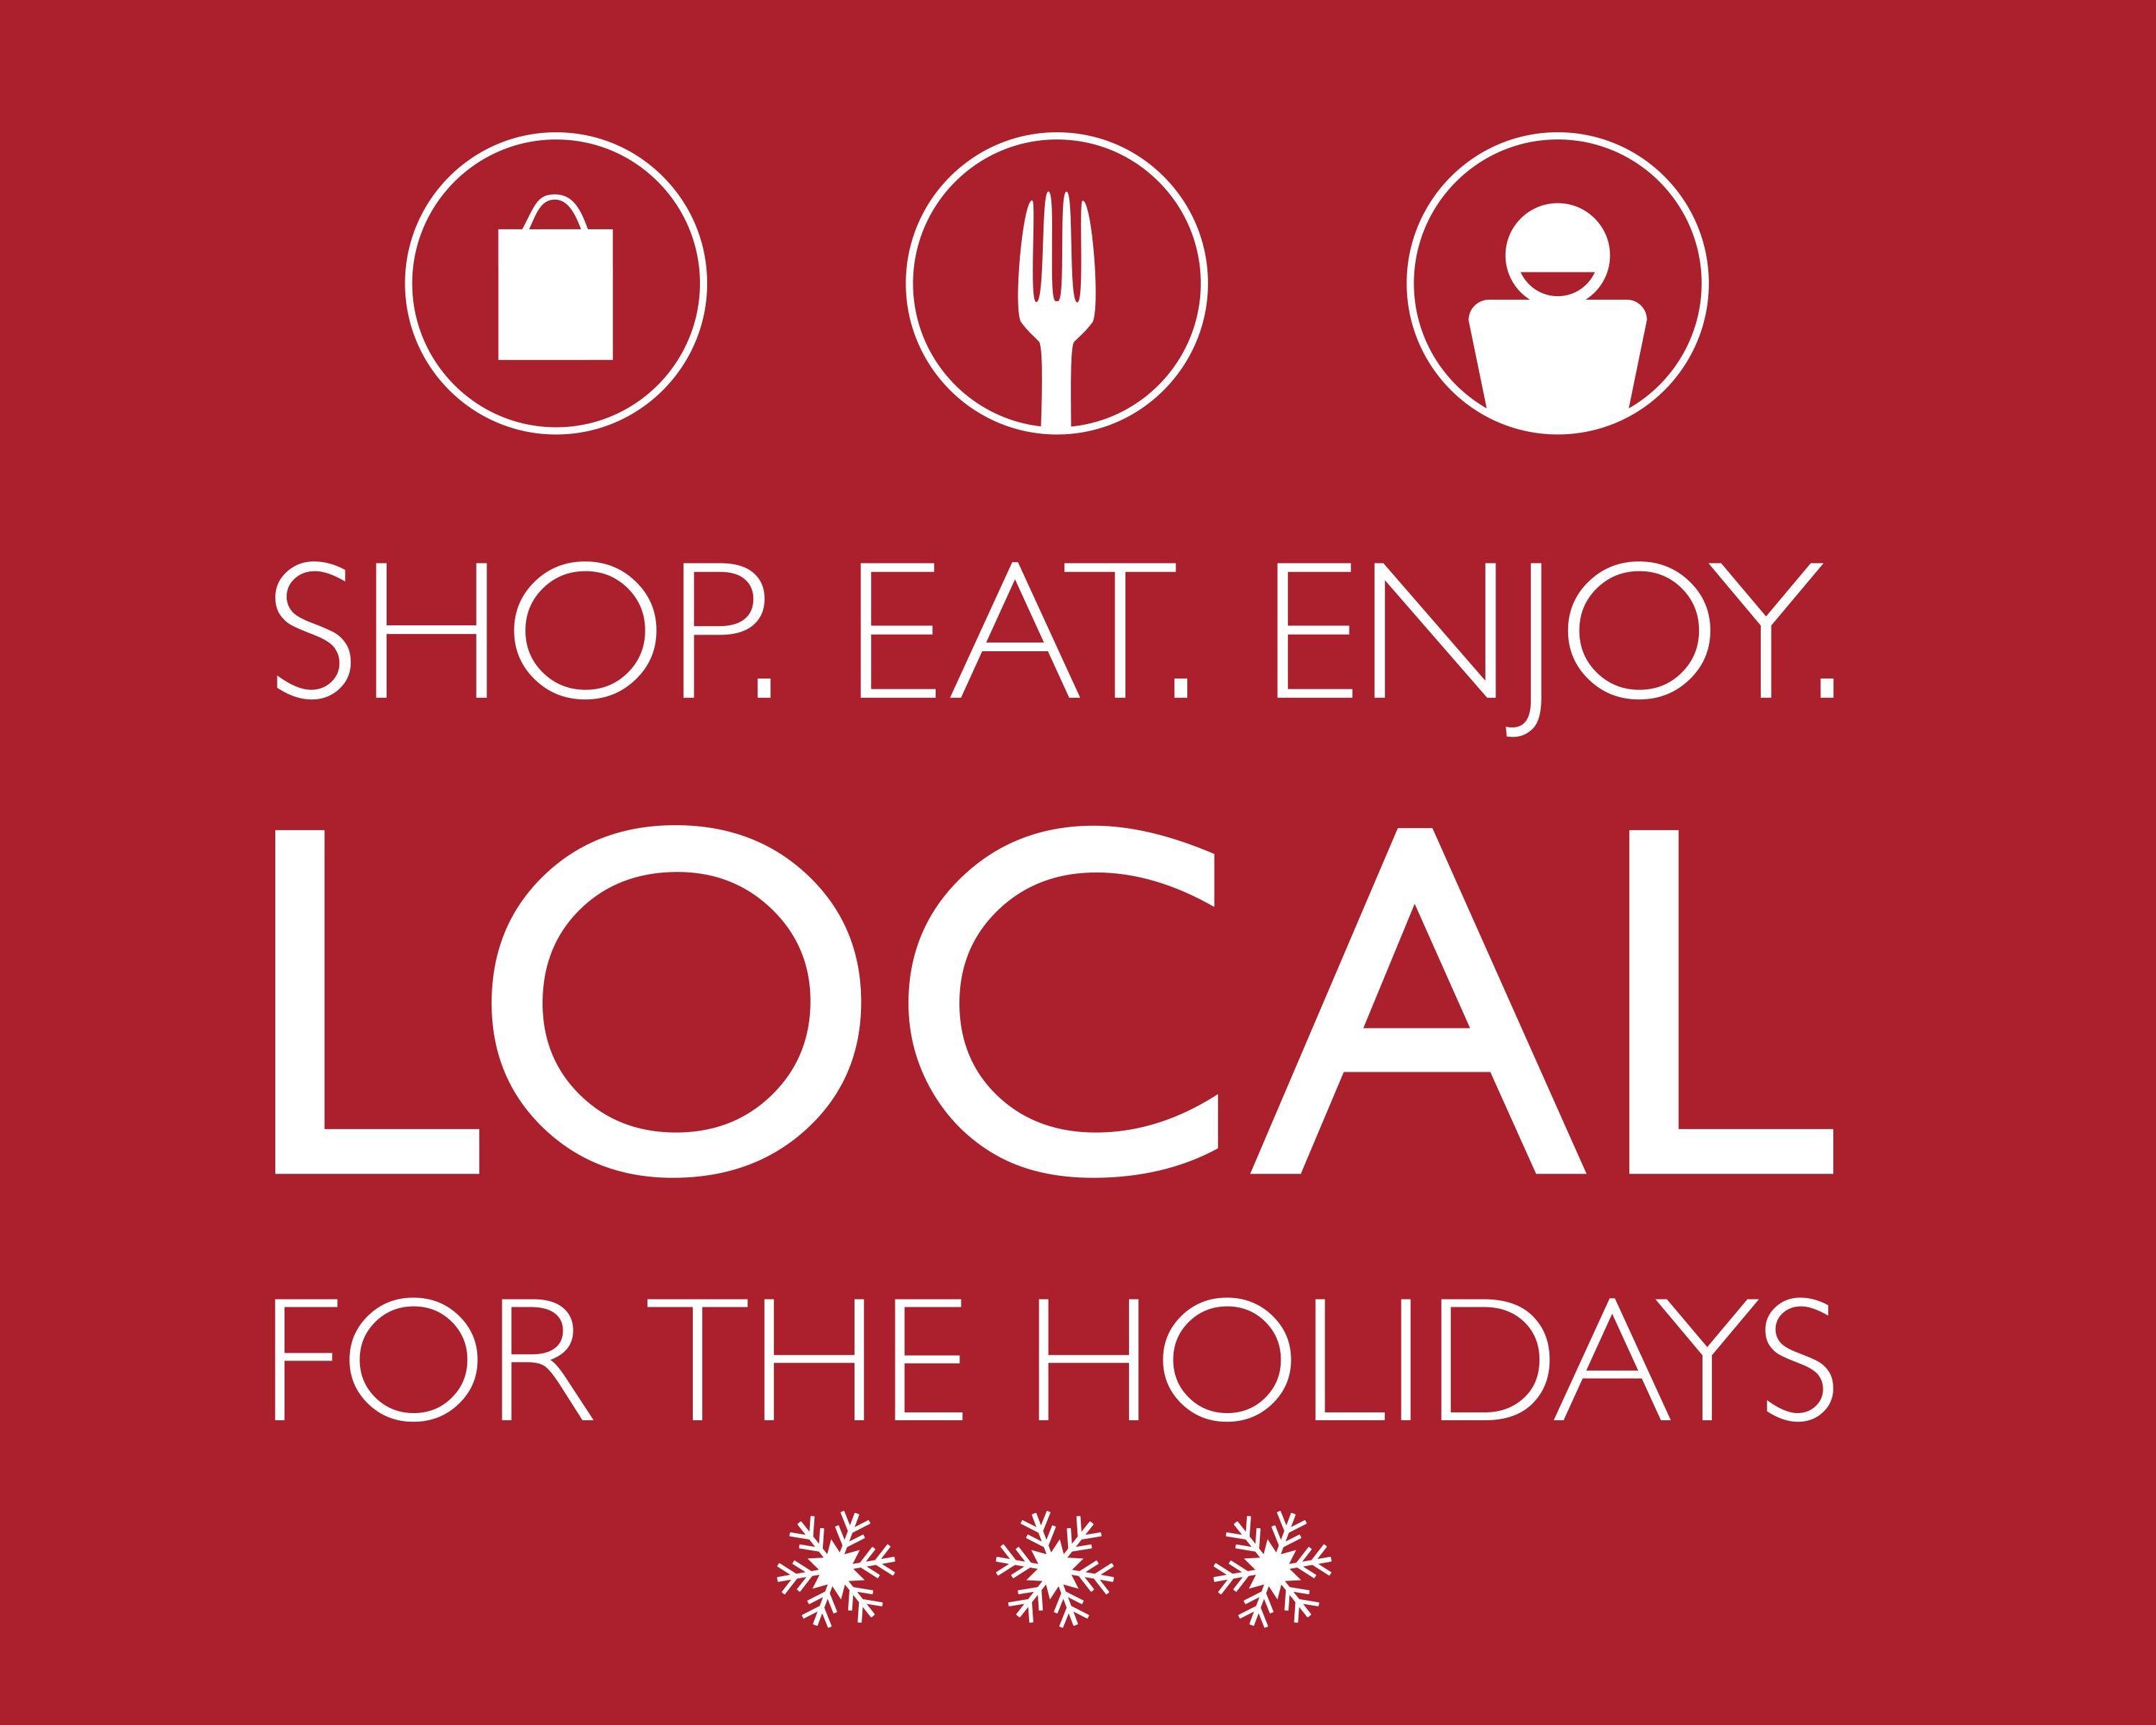 Shoplocal.com Logo - shop-local-holiday-logo - Chamber of Commerce